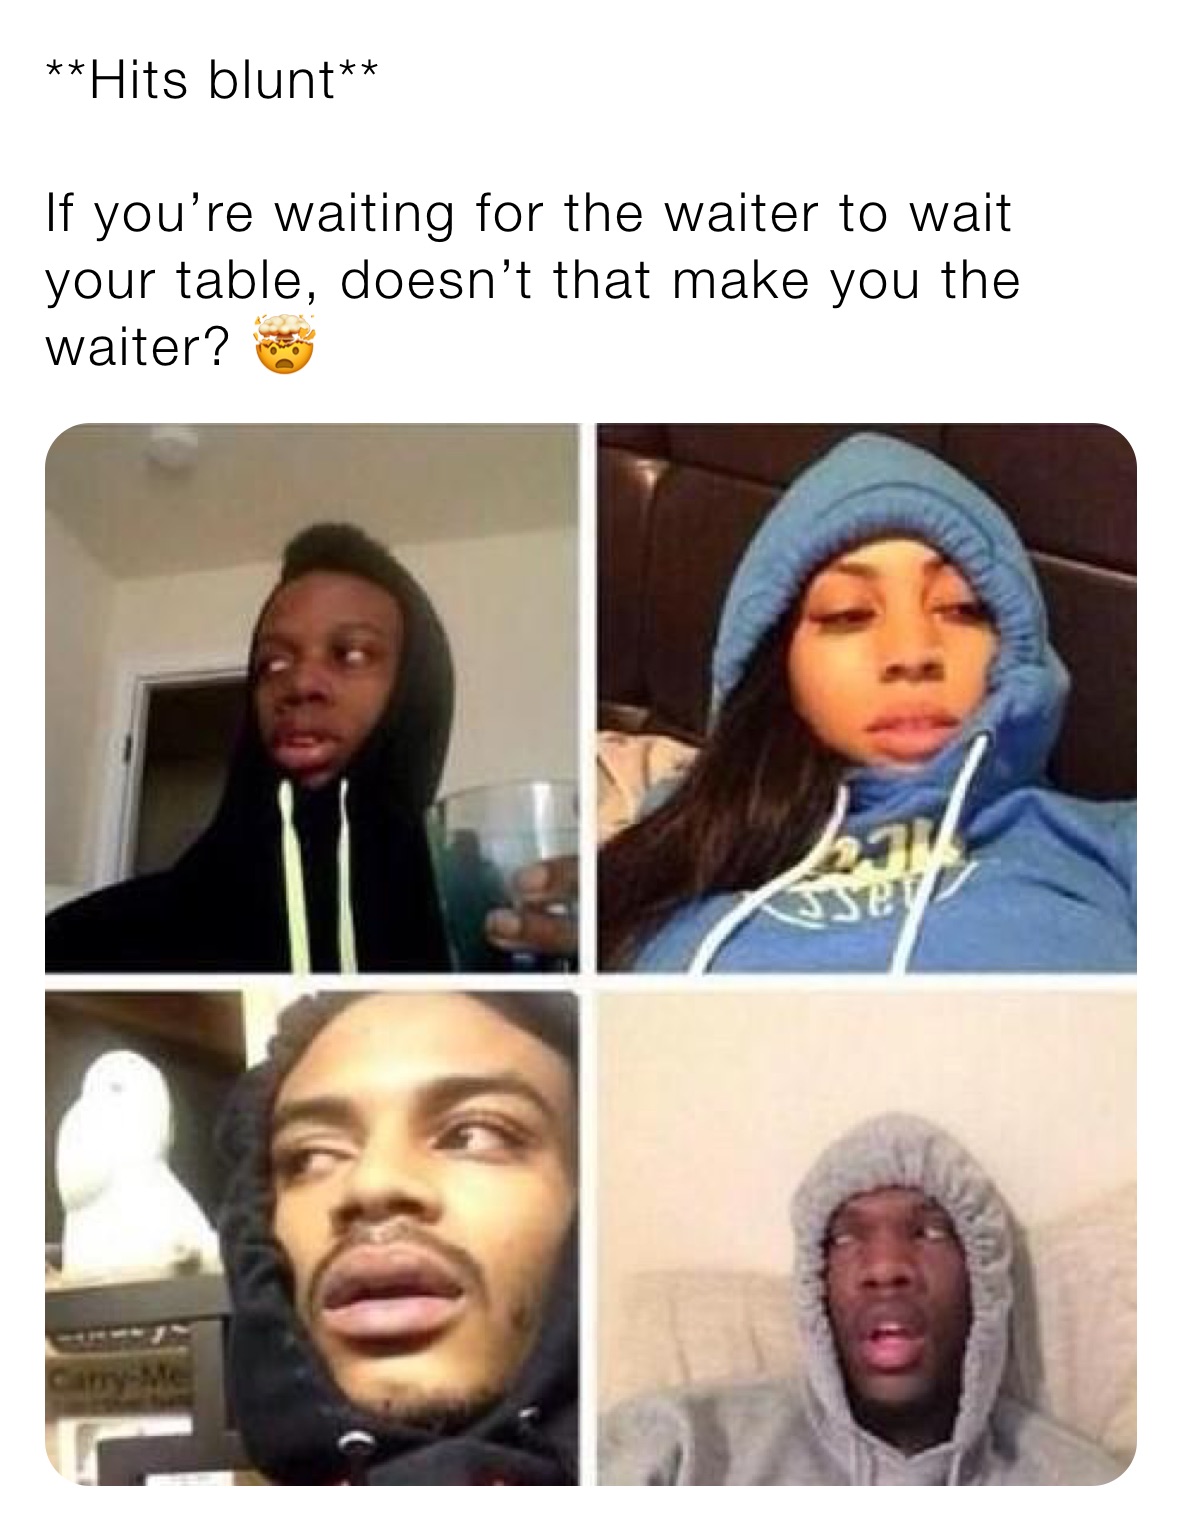 **Hits blunt**

If you’re waiting for the waiter to wait your table, doesn’t that make you the waiter? 🤯